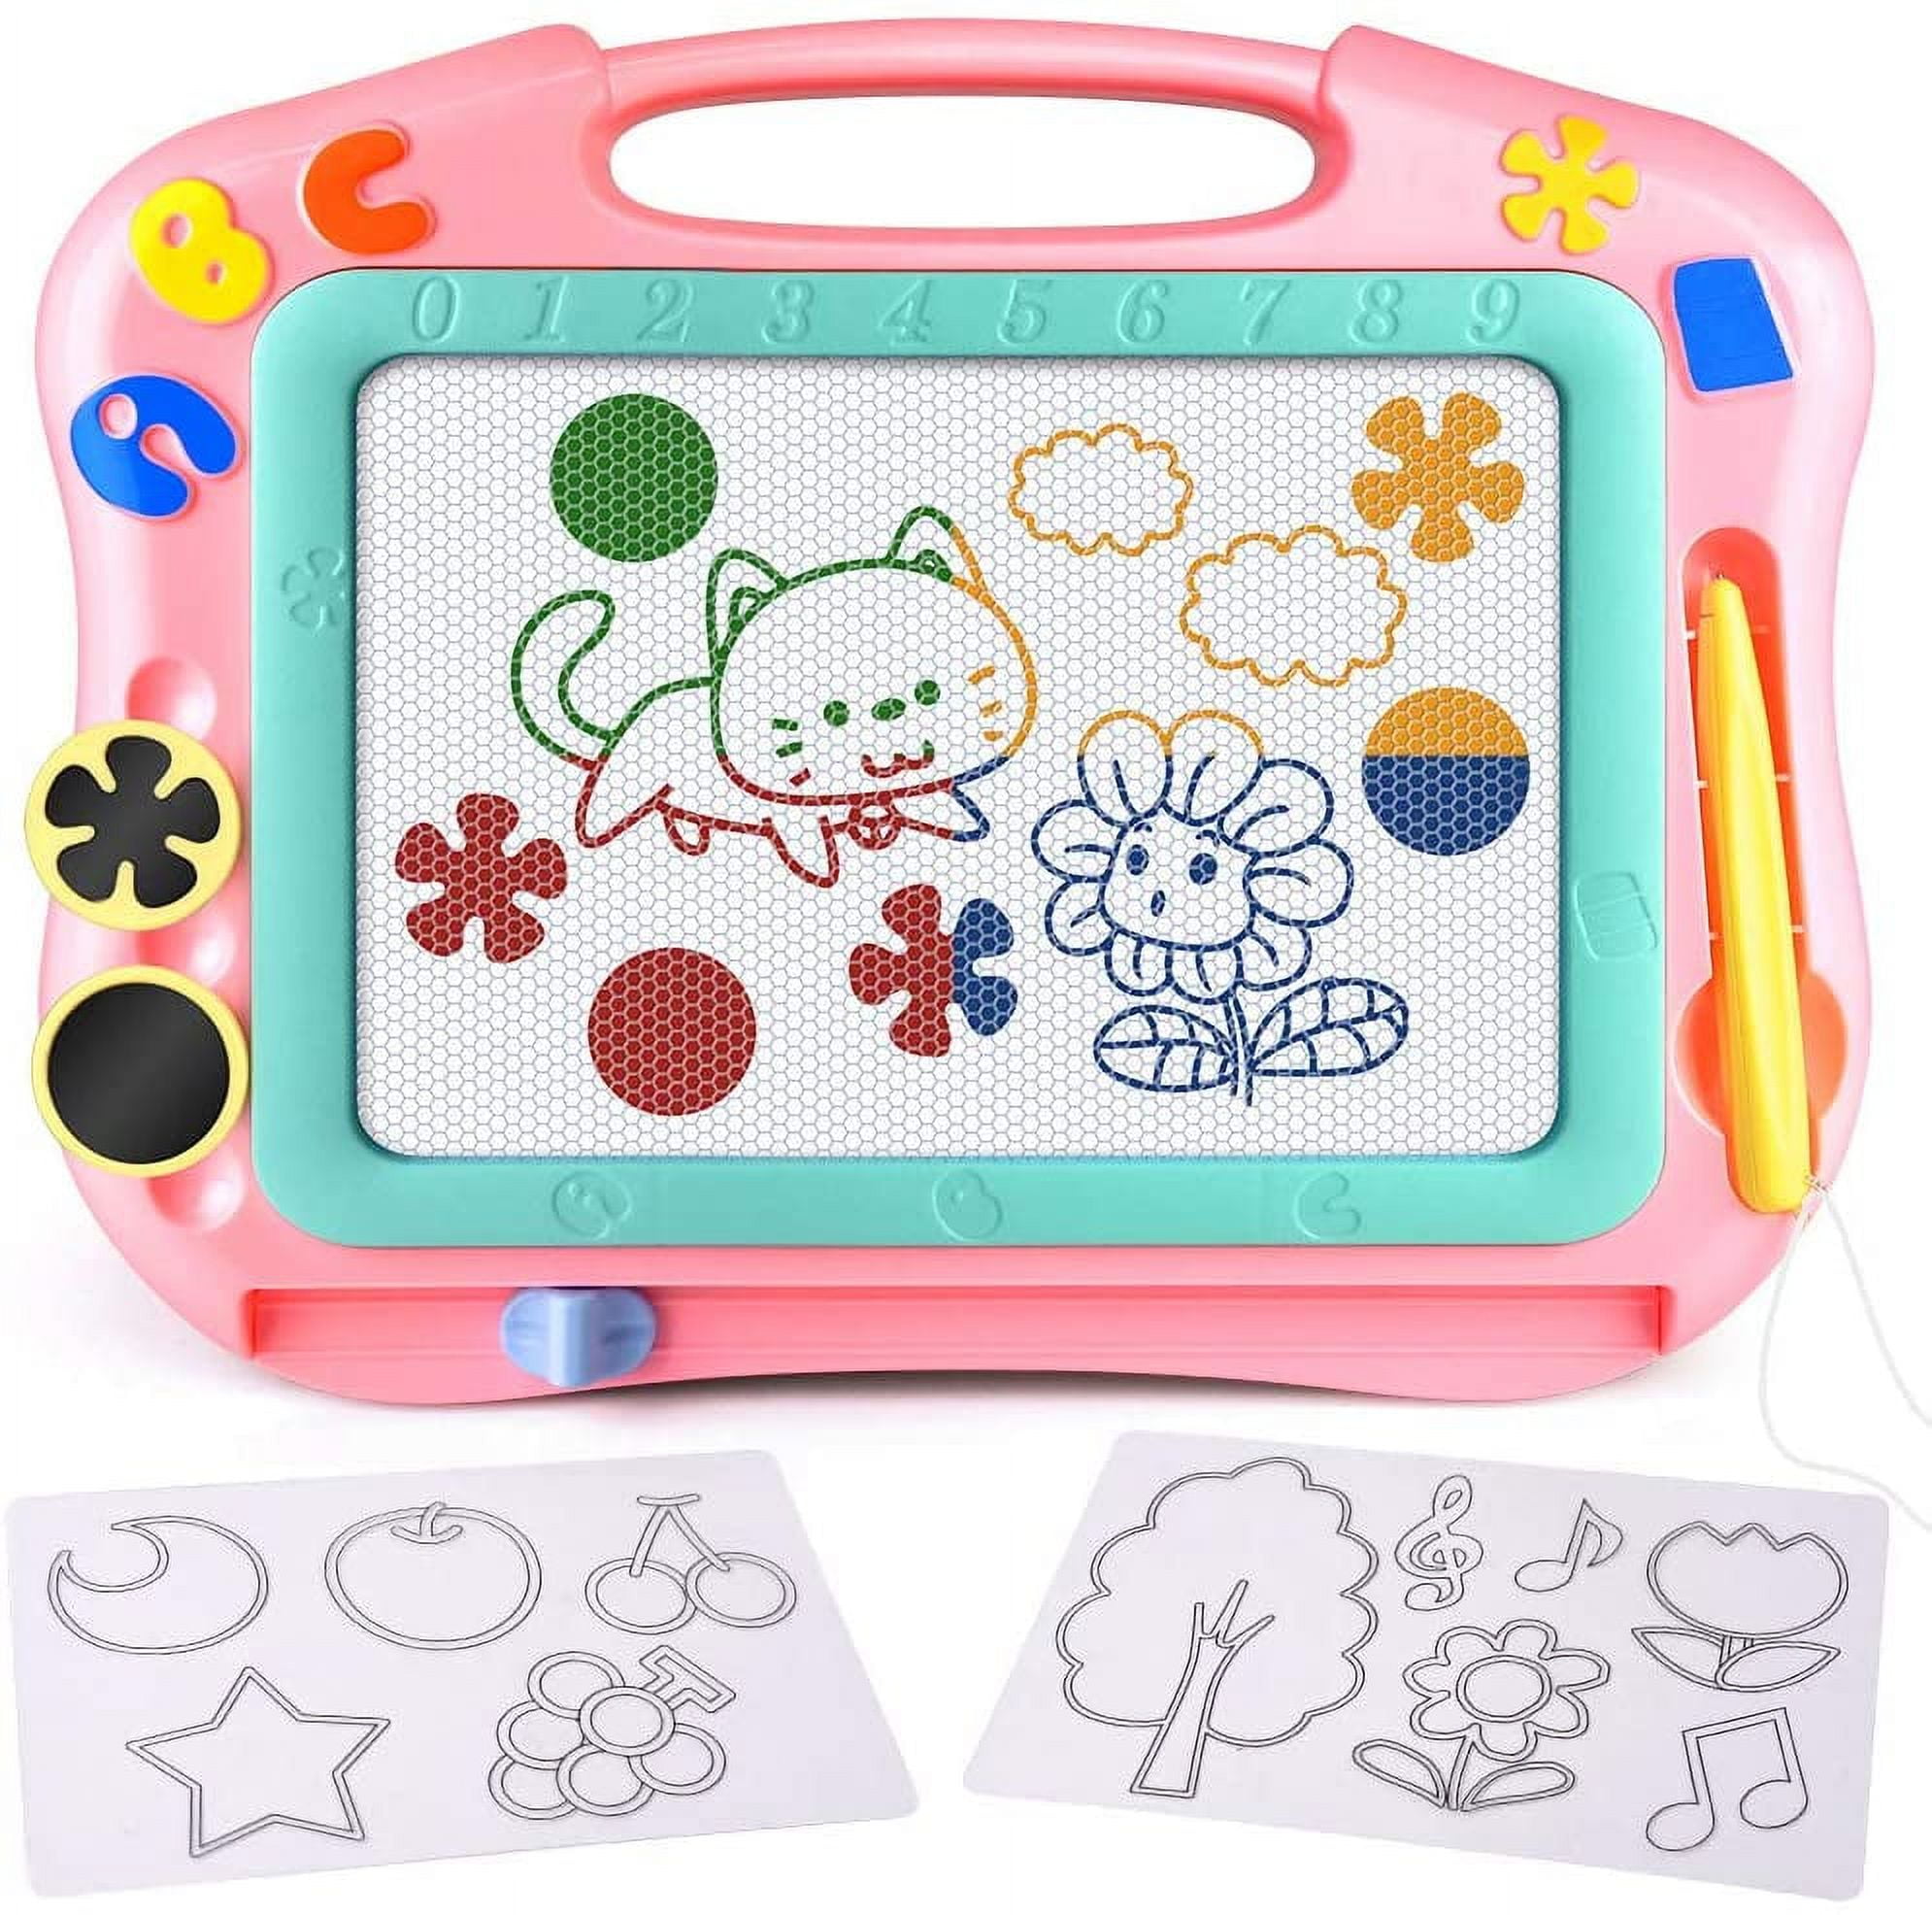  Playmags Magnetic Drawing Board, Travel Toys for Kids &  Toddlers, Magnet Beads w/Drawing Stylus, 8.5 x 7 Travel Size Road Trip  Activities for Boys & Girls Ages 4-8 : Office